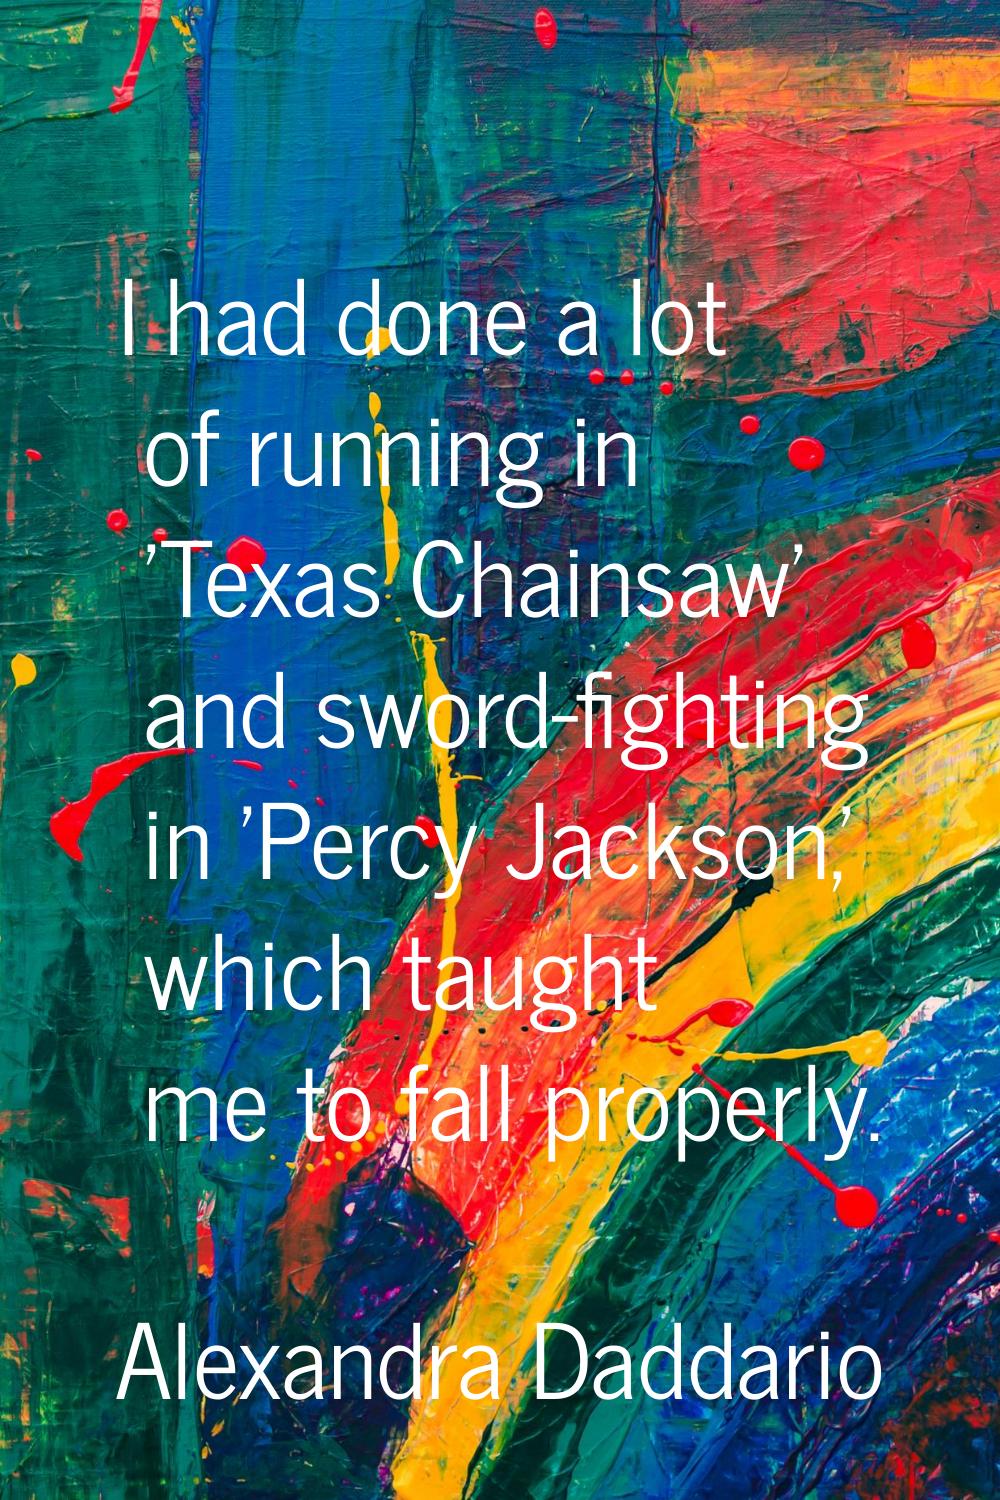 I had done a lot of running in 'Texas Chainsaw' and sword-fighting in 'Percy Jackson,' which taught